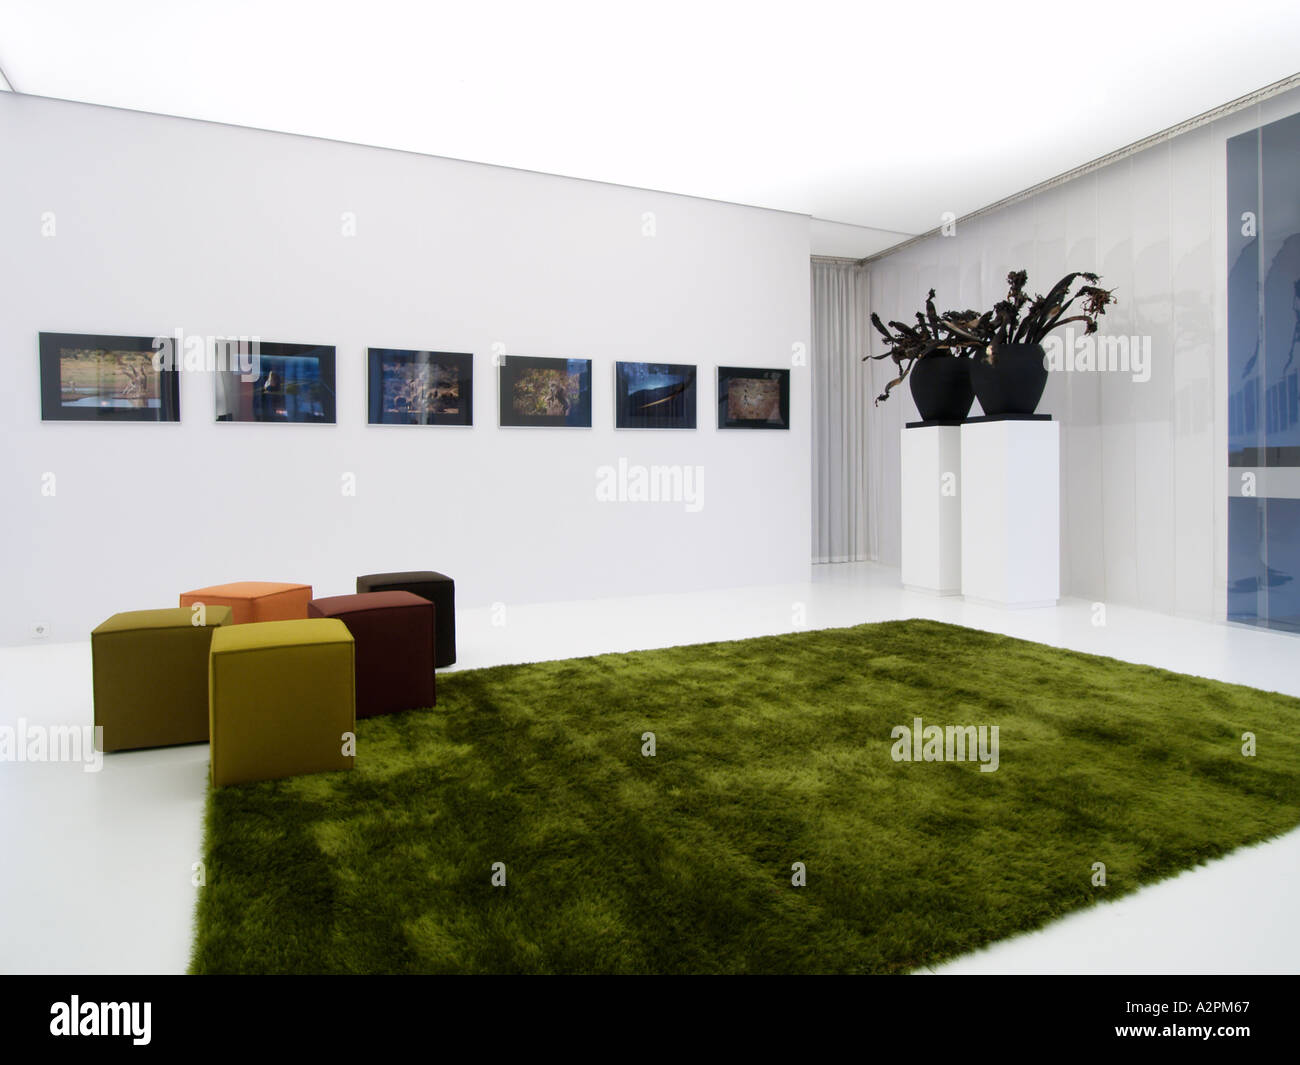 White gallery space with art on the walls green carpet and design cube seats in various colors Stock Photo